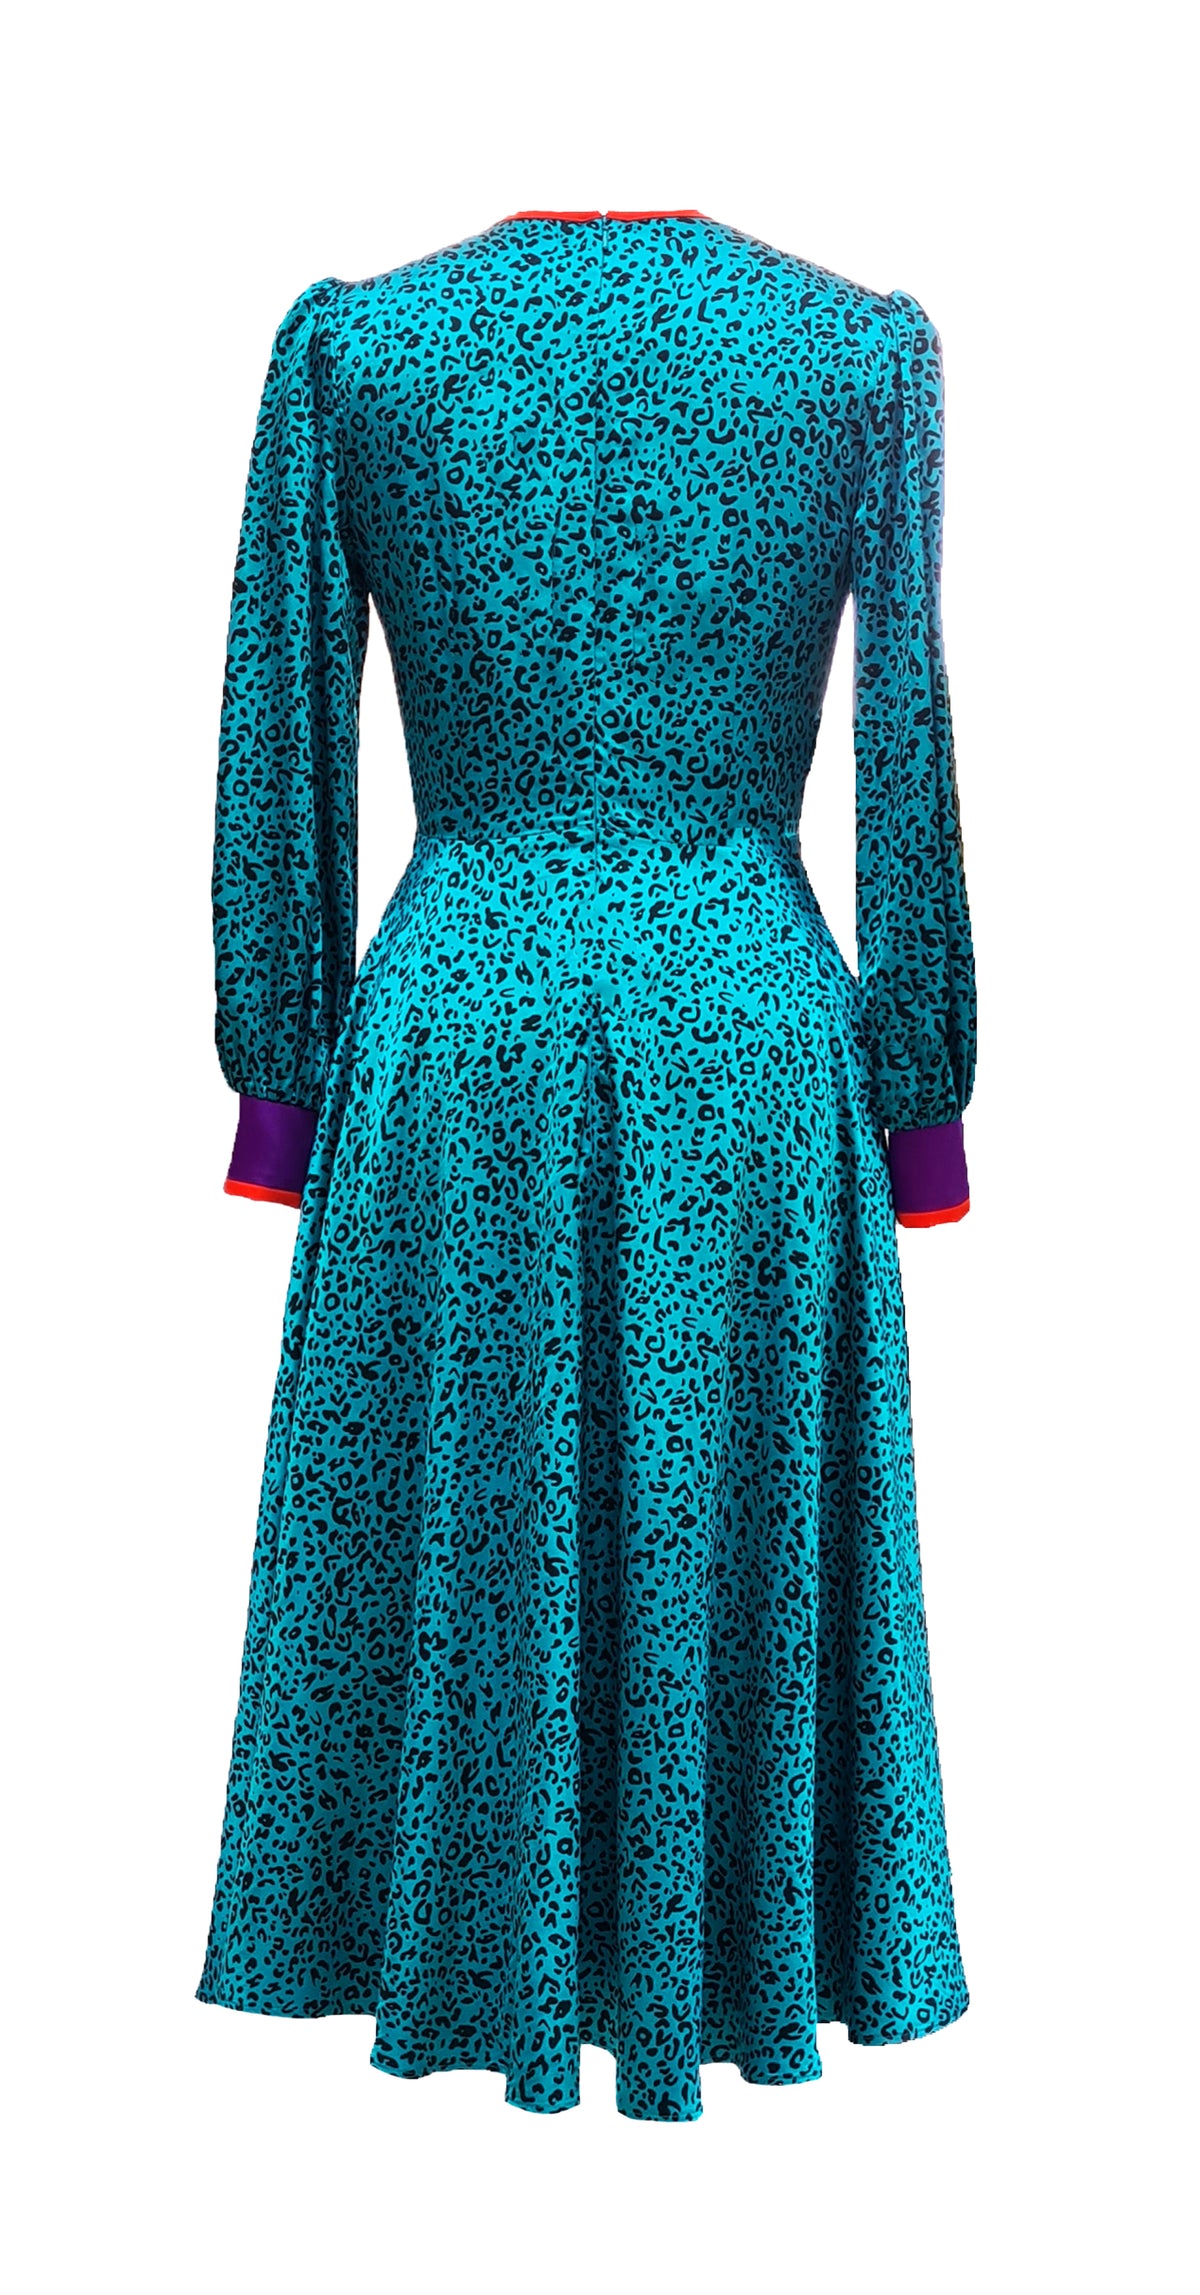 Diary of Jane Dress DRC330 Turquoise Leopard Print